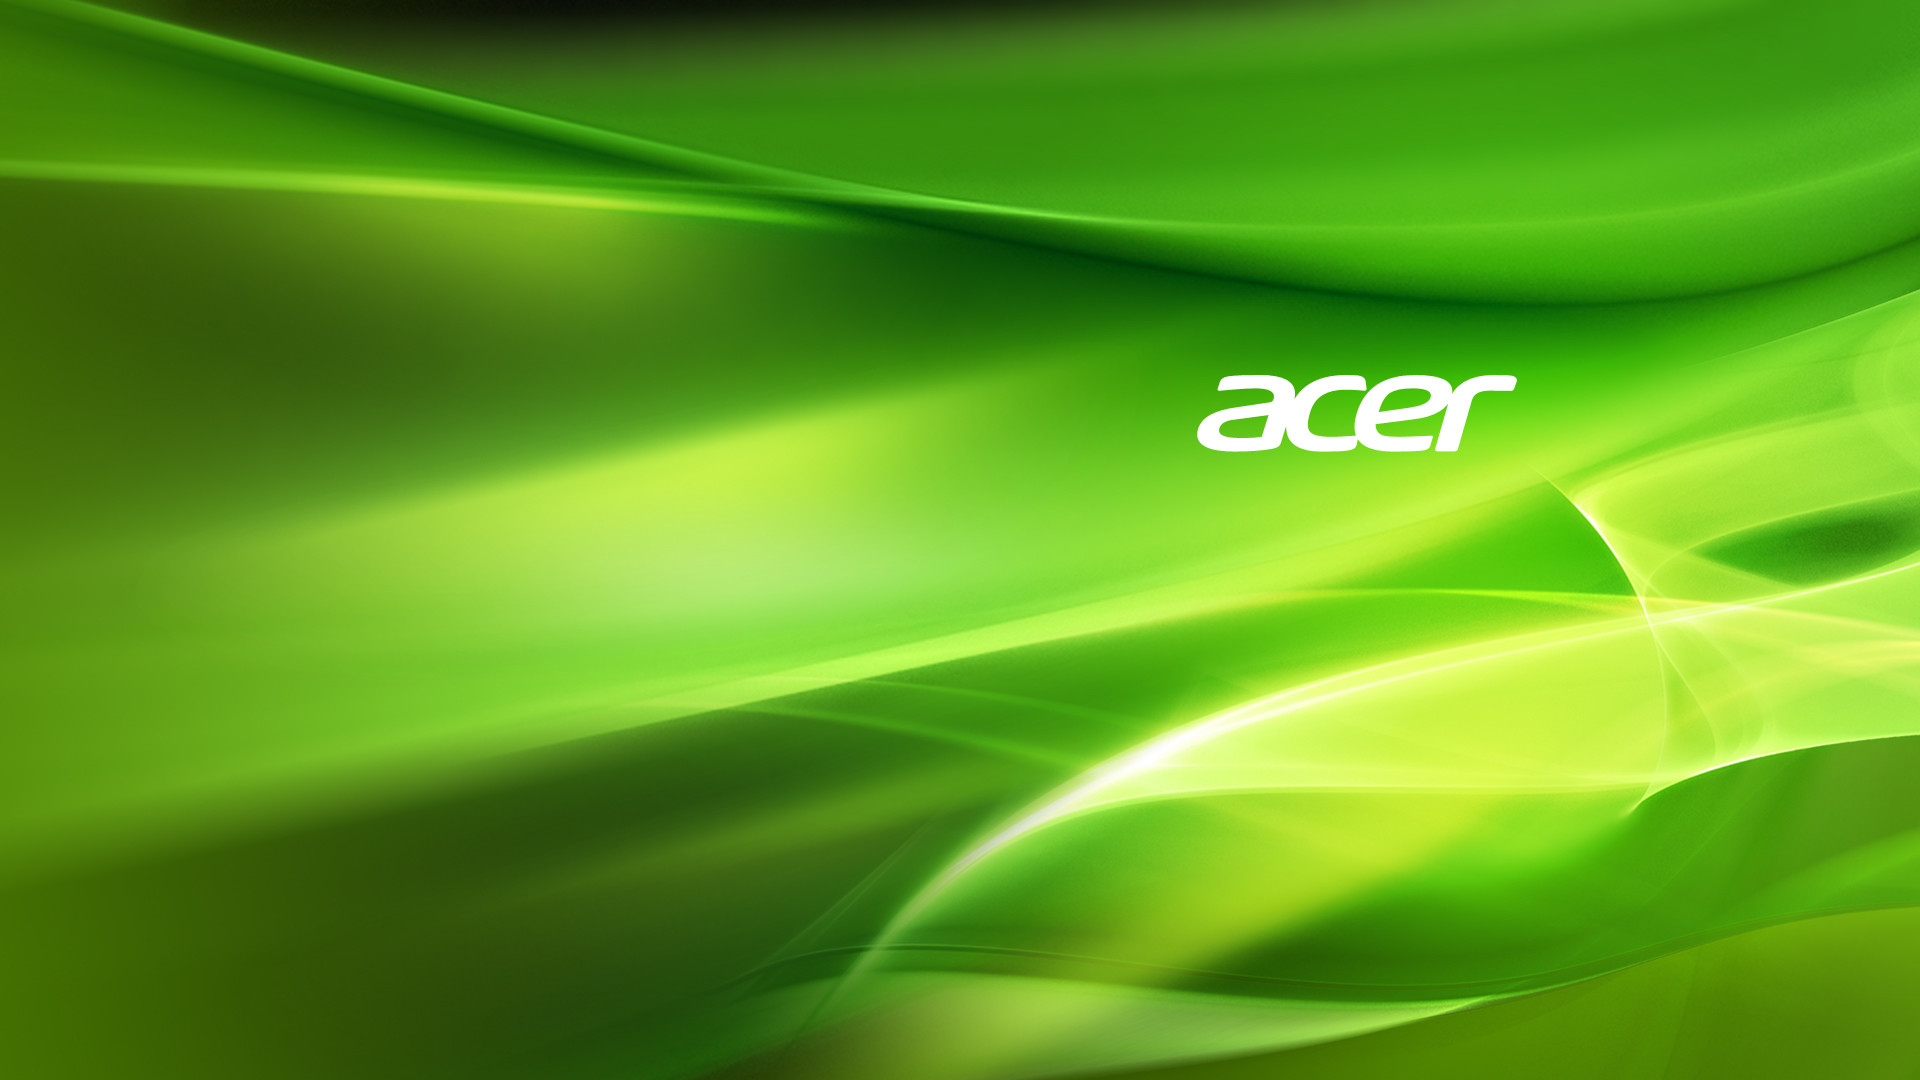 Acer Logo Wallpapers - Top Free Acer Logo Backgrounds - WallpaperAccess